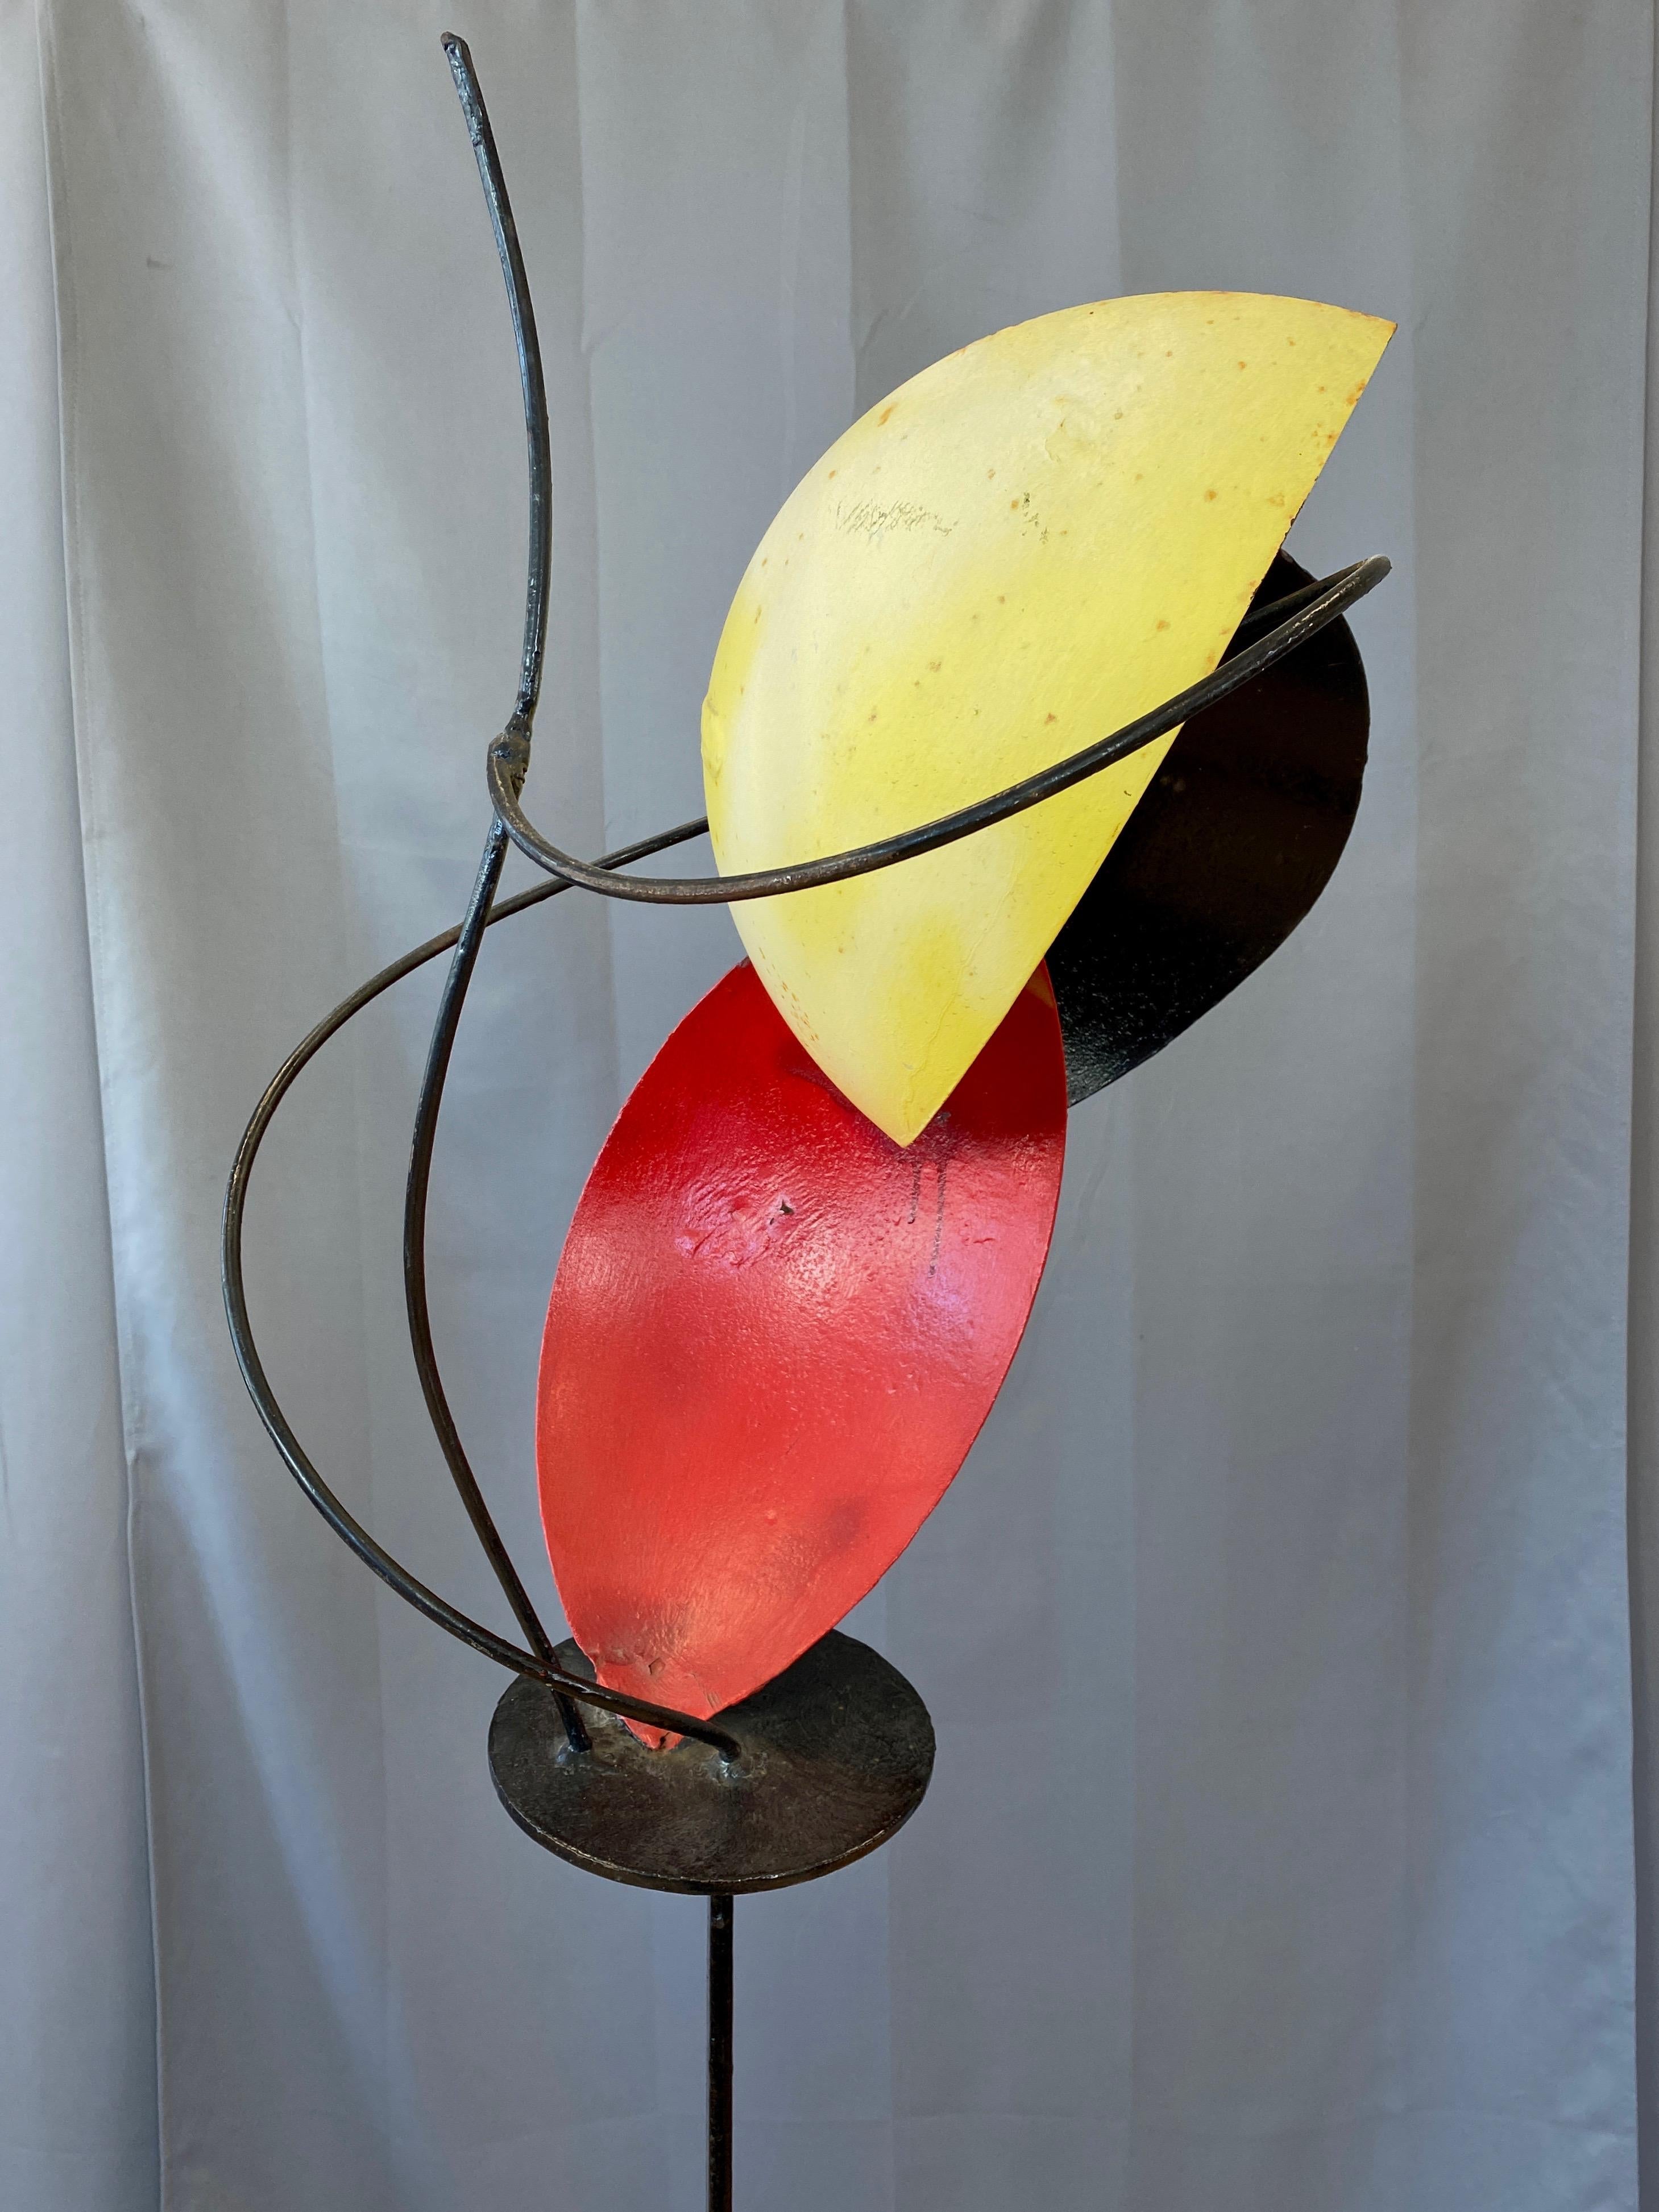 Béla Harcos Tall Abstract Expressionist Enameled Steel Sculpture, Late 1990s For Sale 6